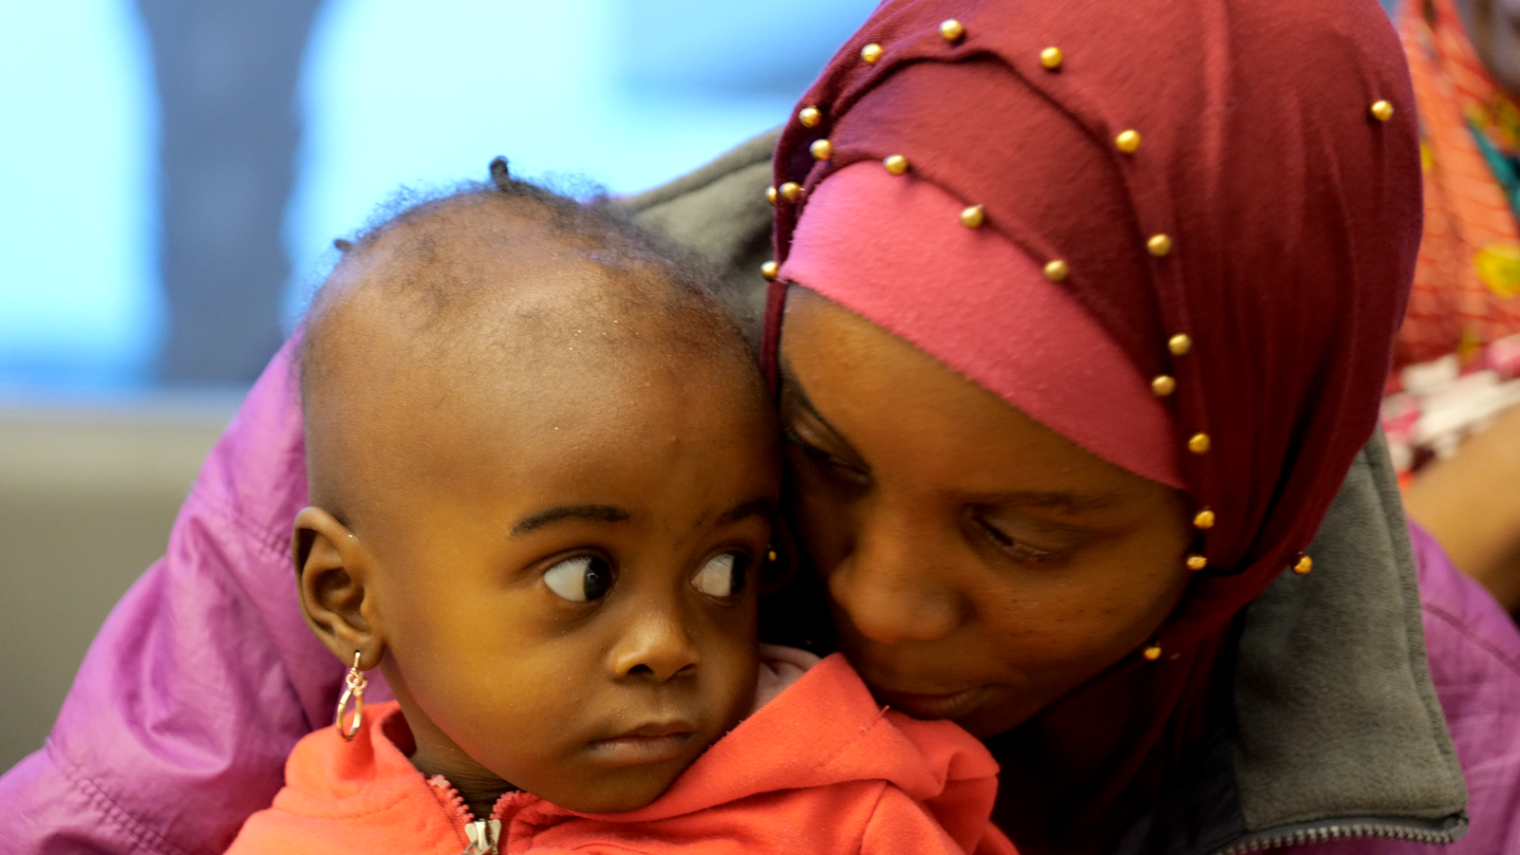 Balkis Makame Haji and her daughter Fatma arrive in Israel with Save a Child's Heart. Photo by Gil Naor